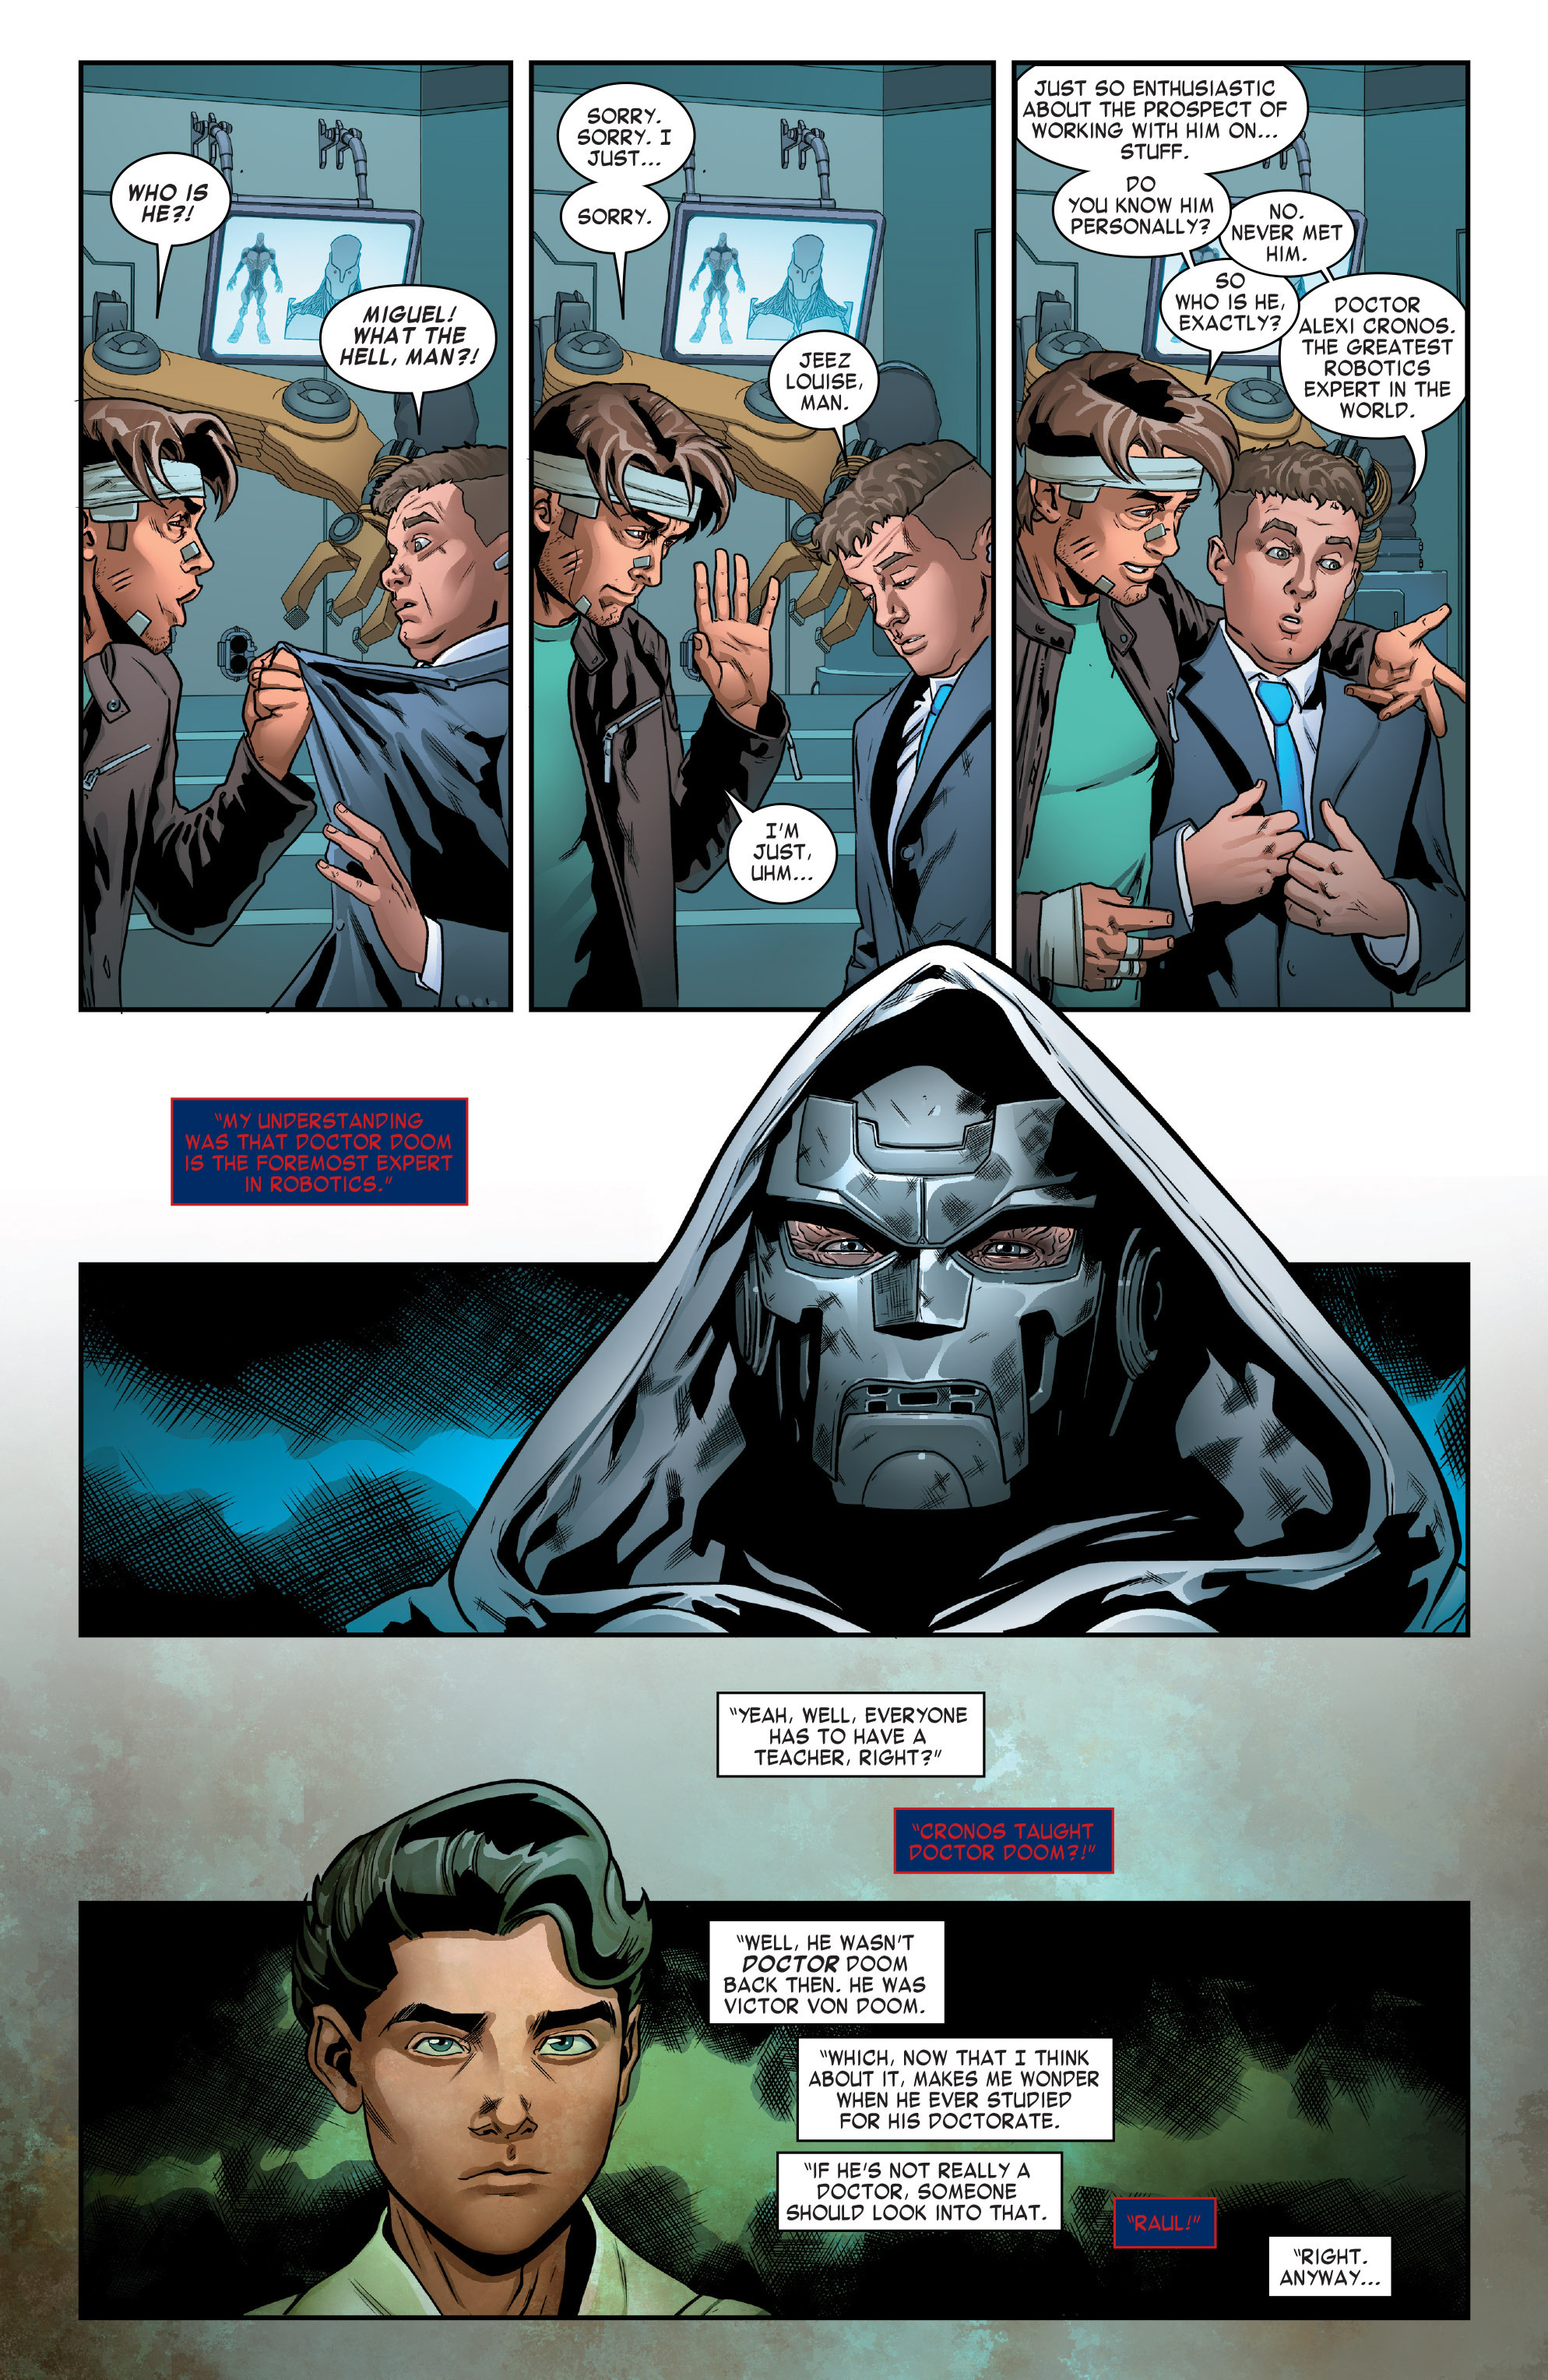 Spider Man 2099 2015 Chapter 2 Page 1 2062